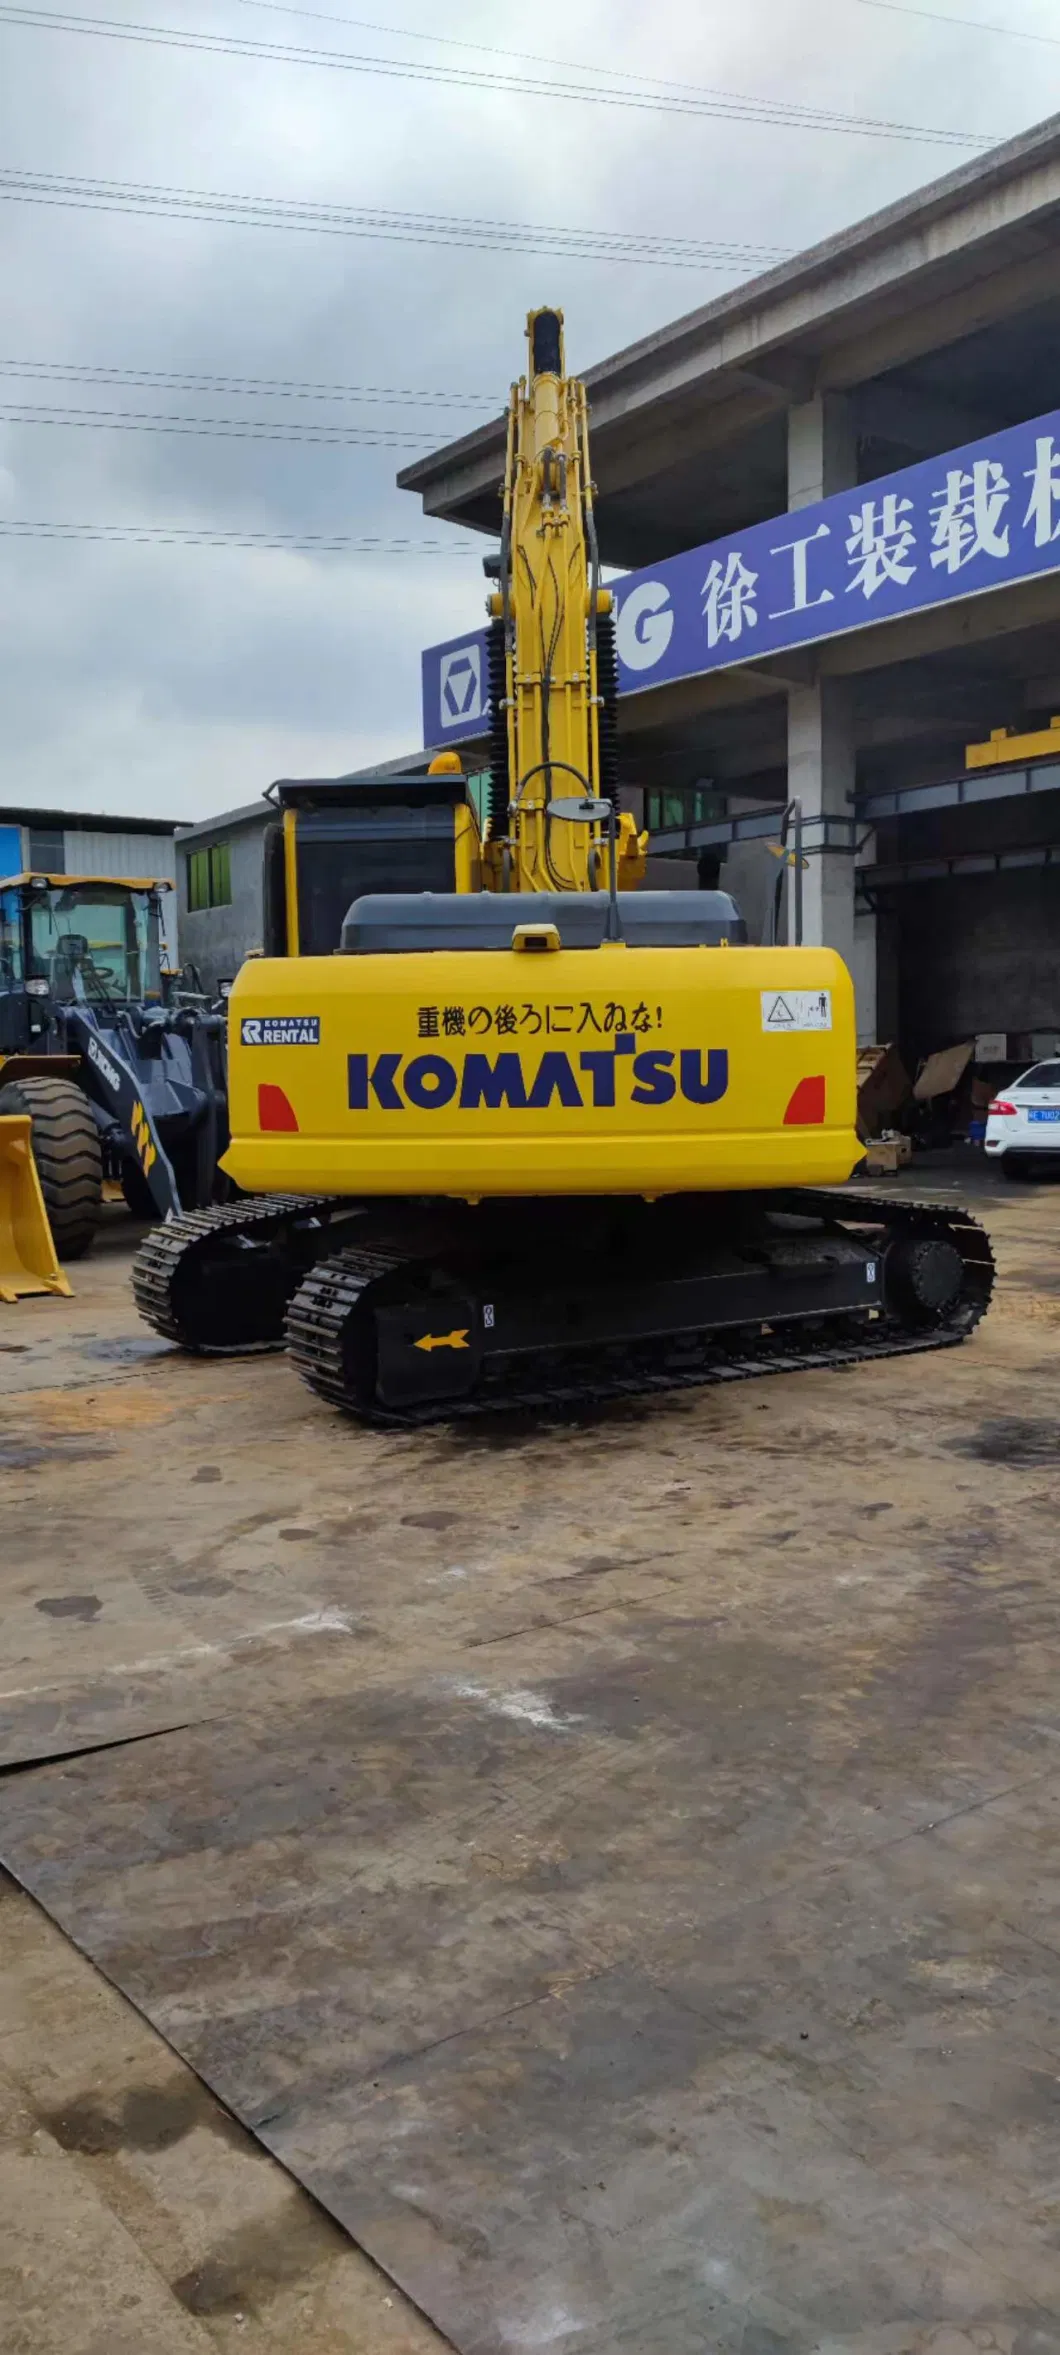 Raygoo Machinery Company Second Hand Excavator Komatsu 200-8 with Good Condition for Sale